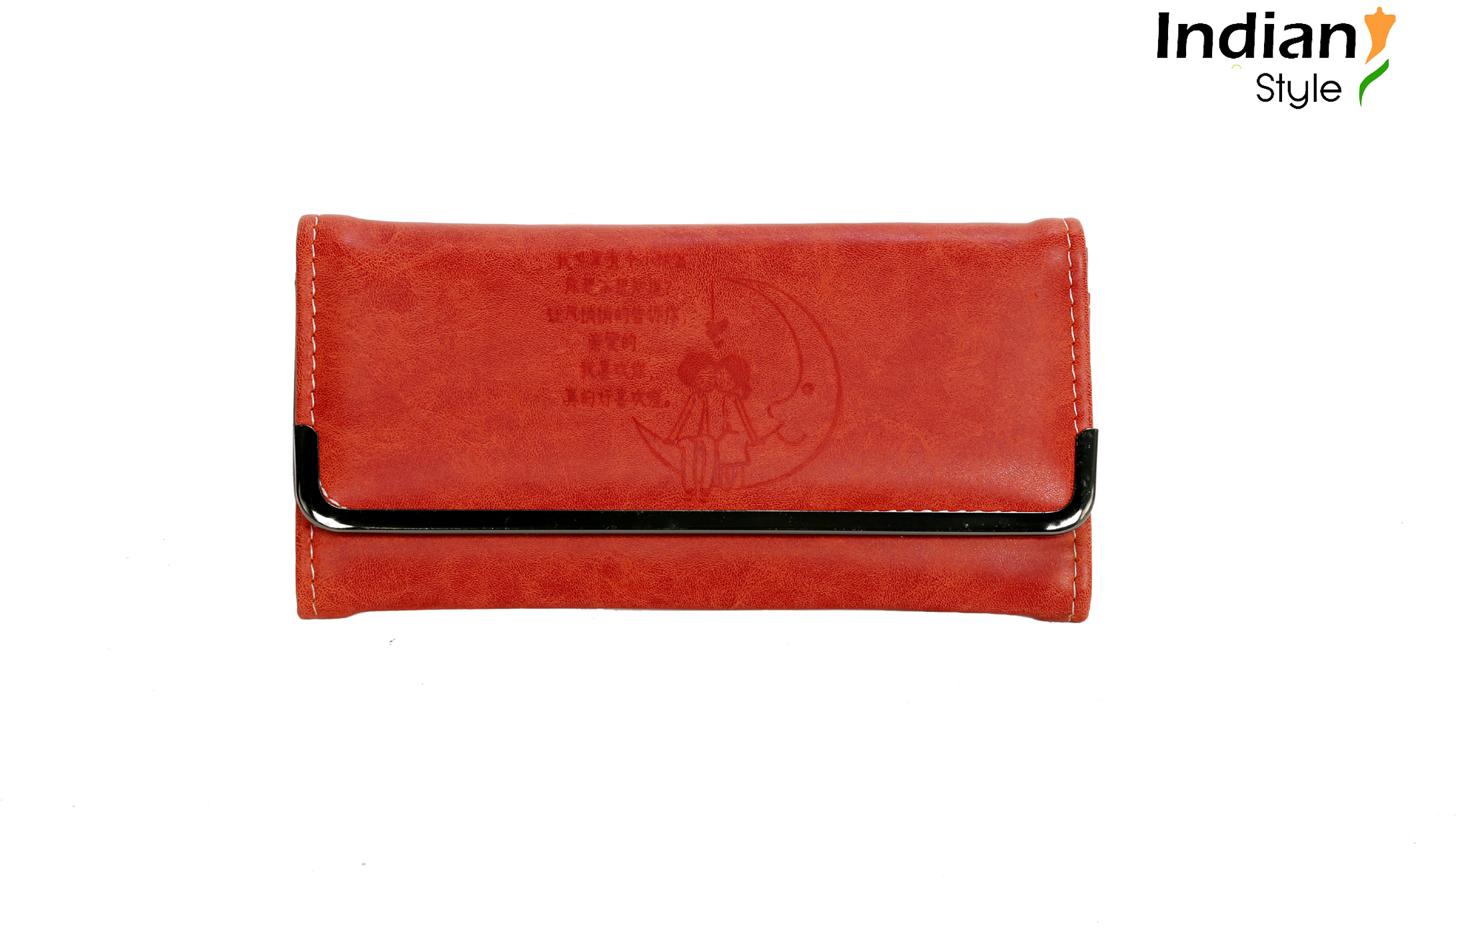 Ladies Clutch Purse at Best Price in Ludhiana | Indian Style Import ...